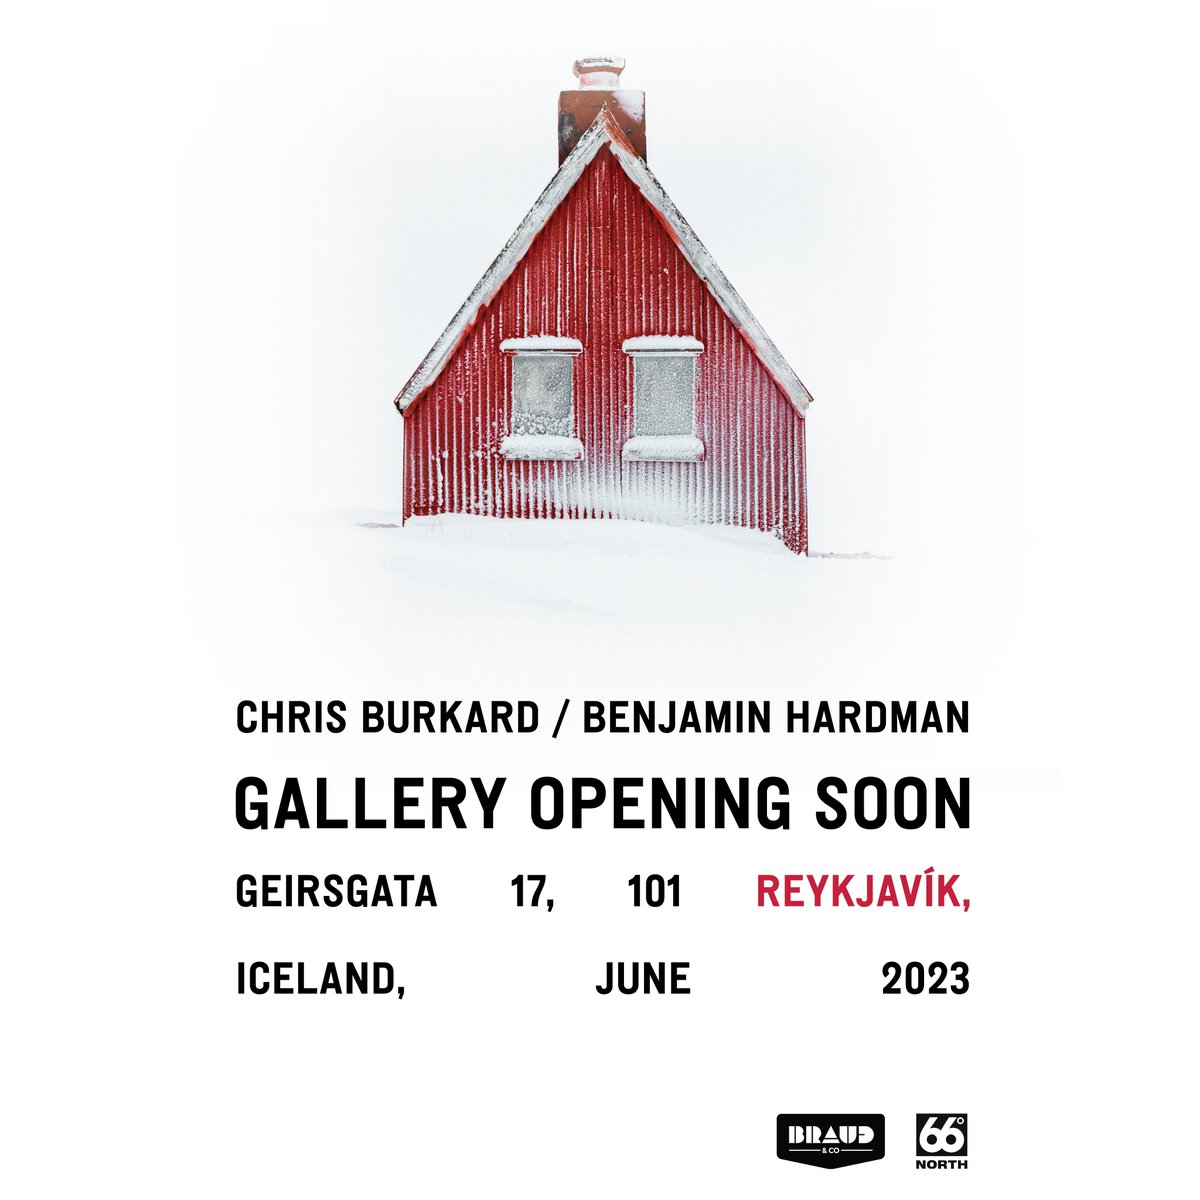 About 6 months ago, I received an offer for a space in downtown Reykjavik to open a gallery with  @benjaminhardman , @66north, Braud & Co - a dream I've been afraid to pursue but this time felt too big to let pass. Construction is in progress and I'm so excited to open in June!